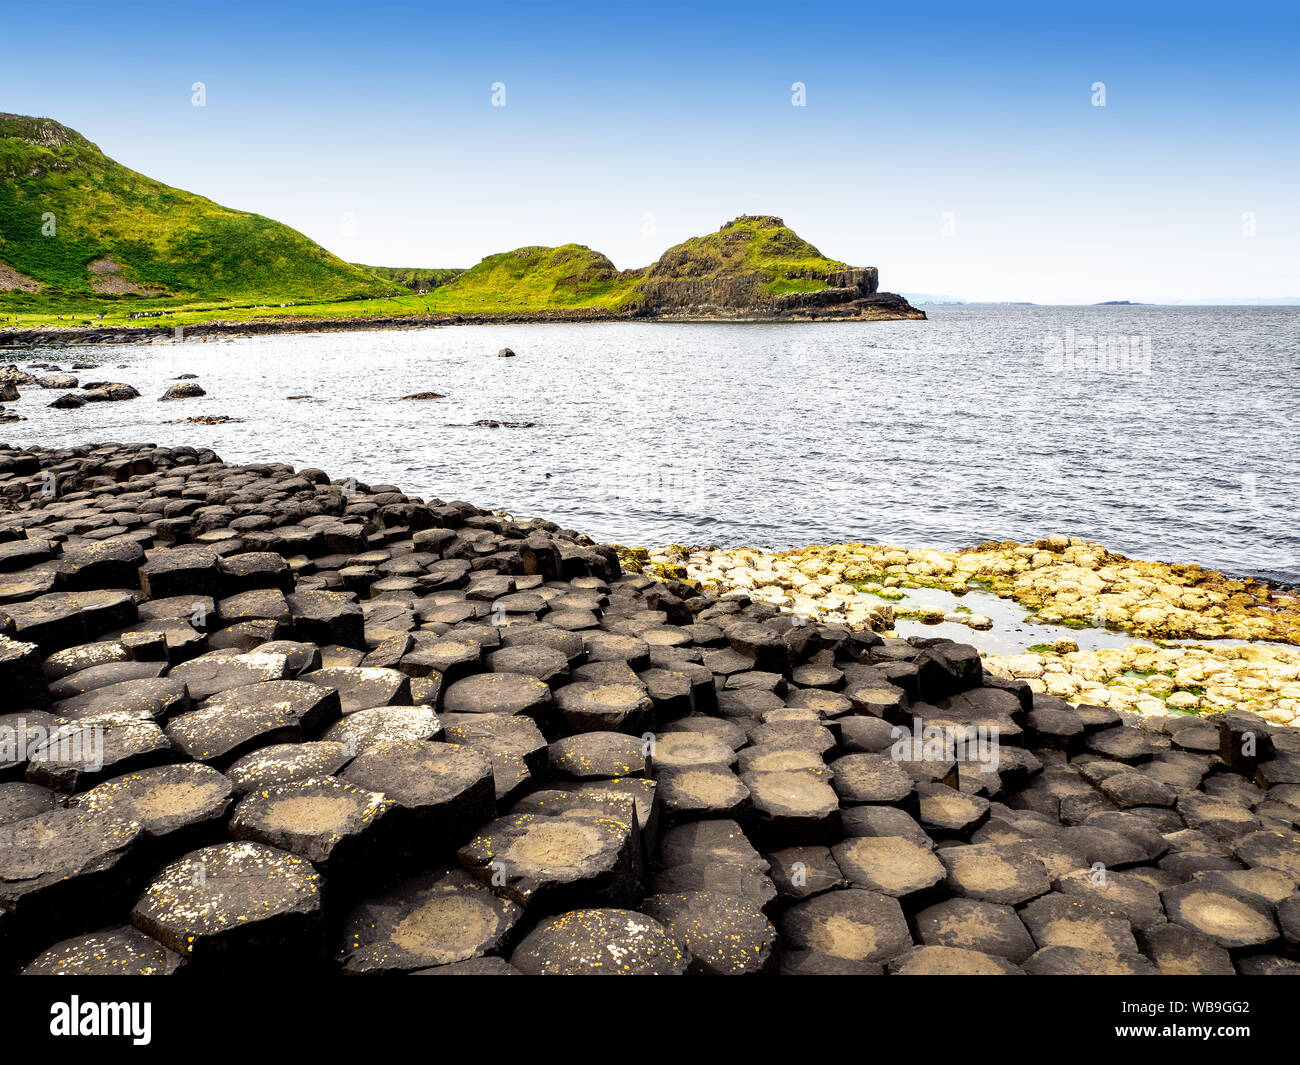 Giant’s Causeway, Northern Ireland, UK. Unique hexagonal and pentagonal geological formations of volcanic basalt rocks at the Atlantic coast, partly c Stock Photo